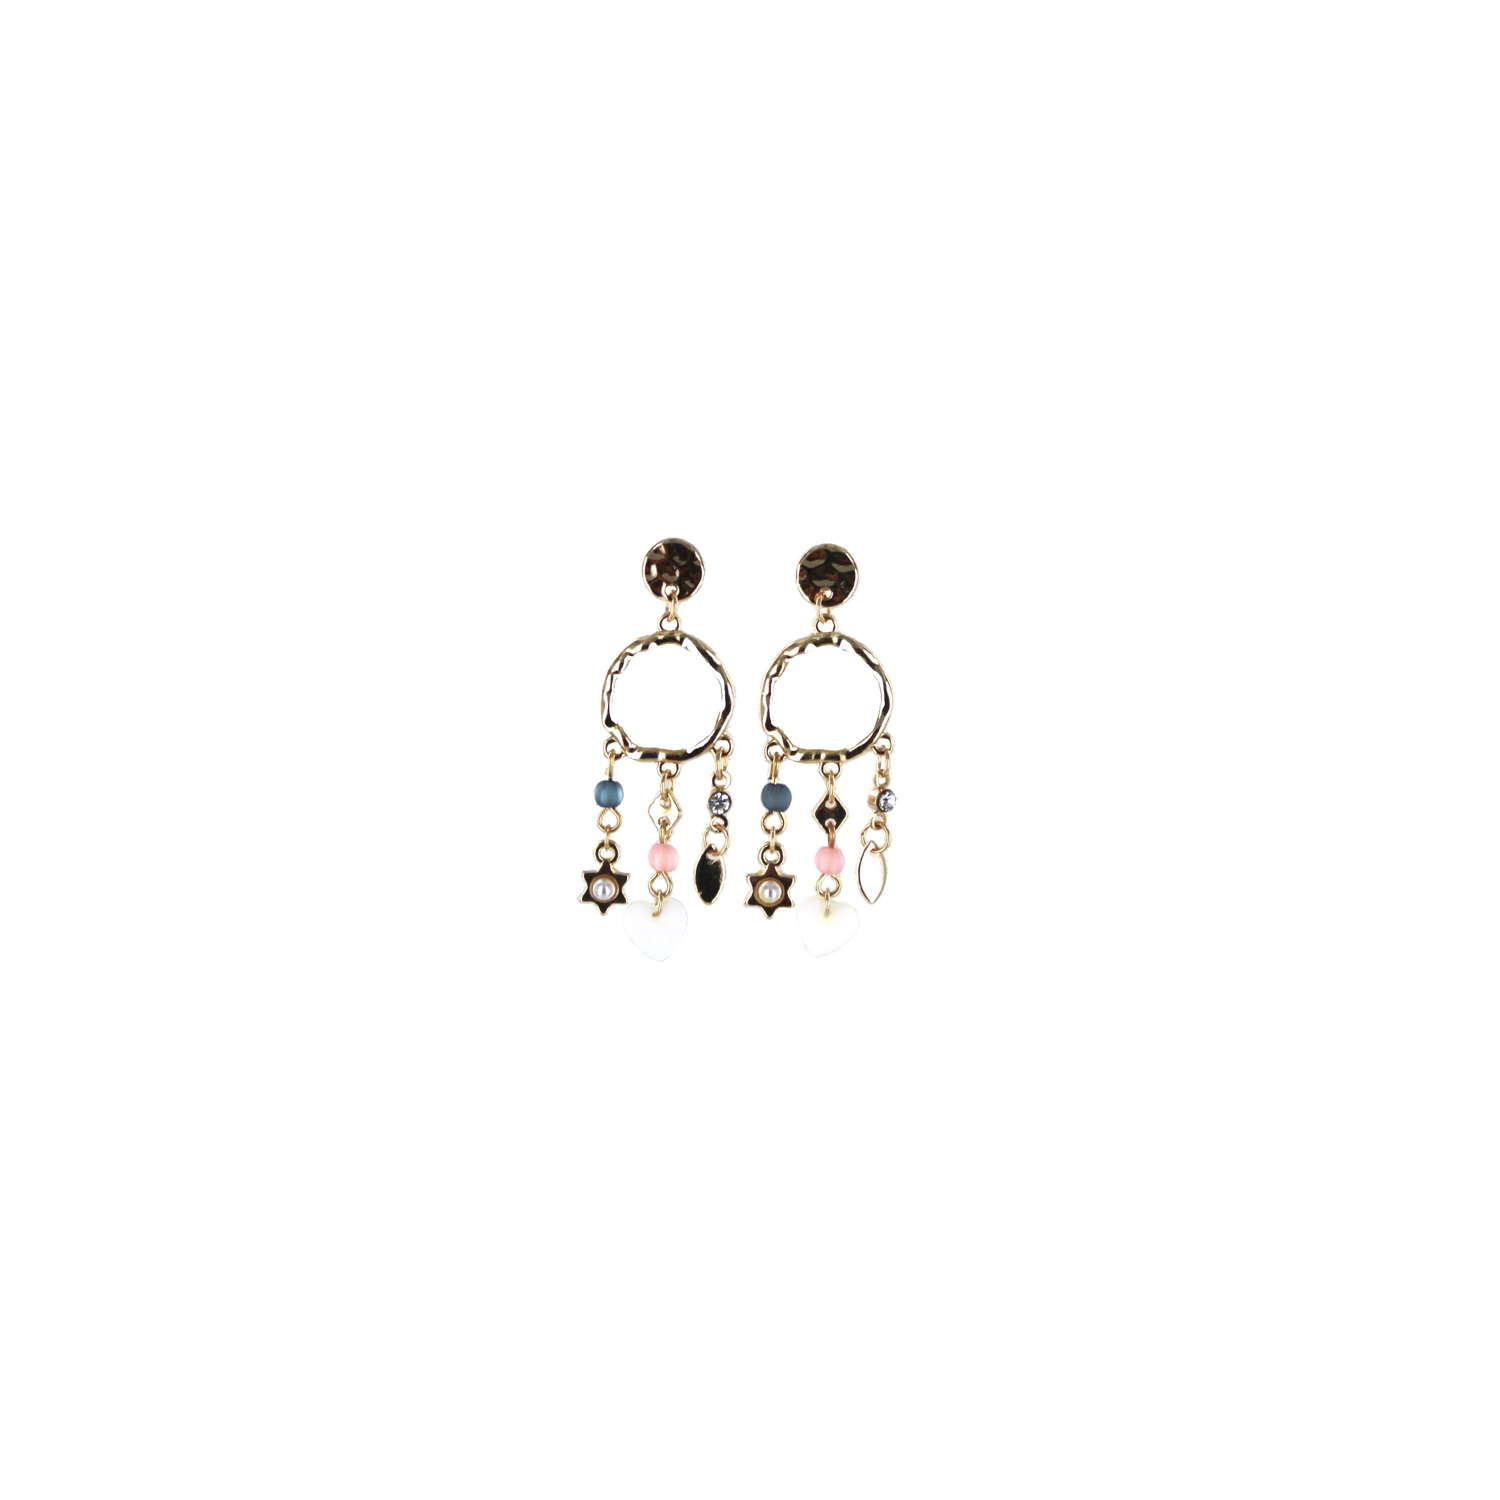 Multi drop hammered effect gold tone earring.